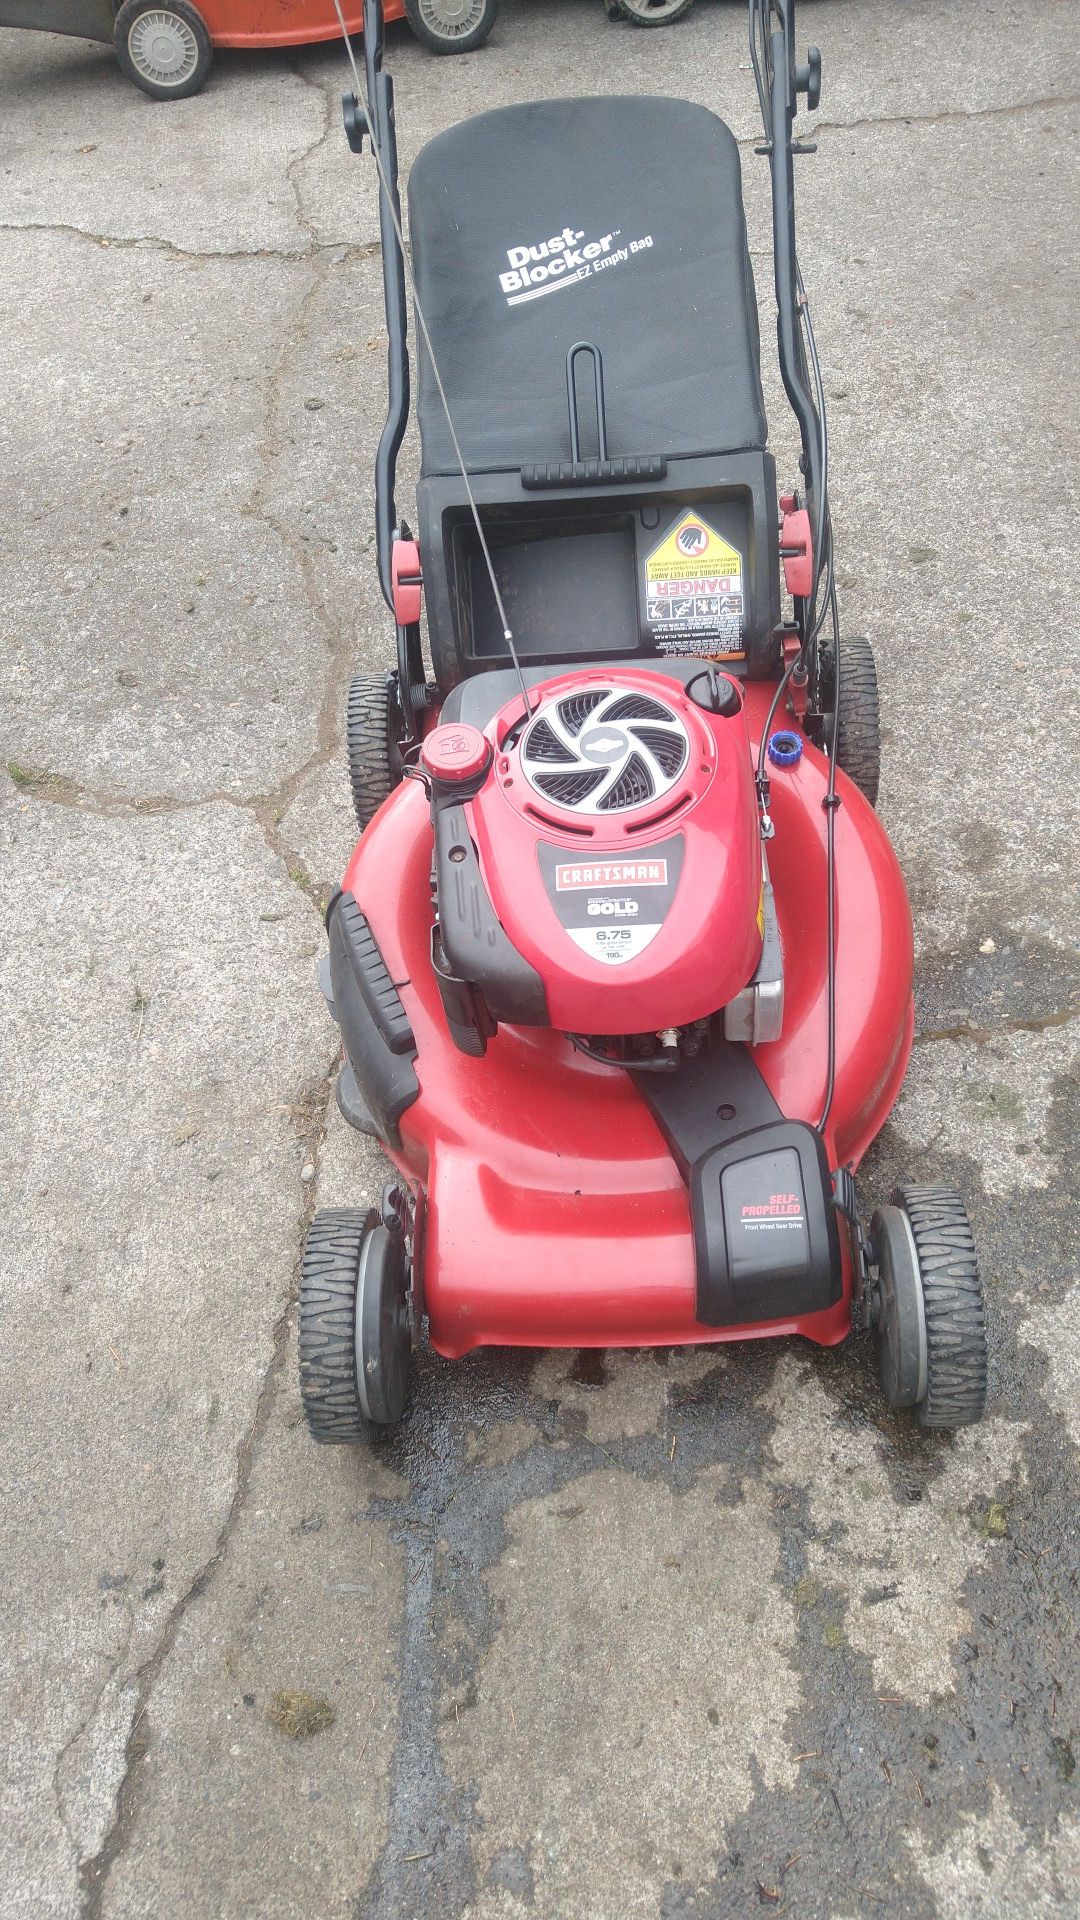 22in Craftsman front wheel drive lawn mower